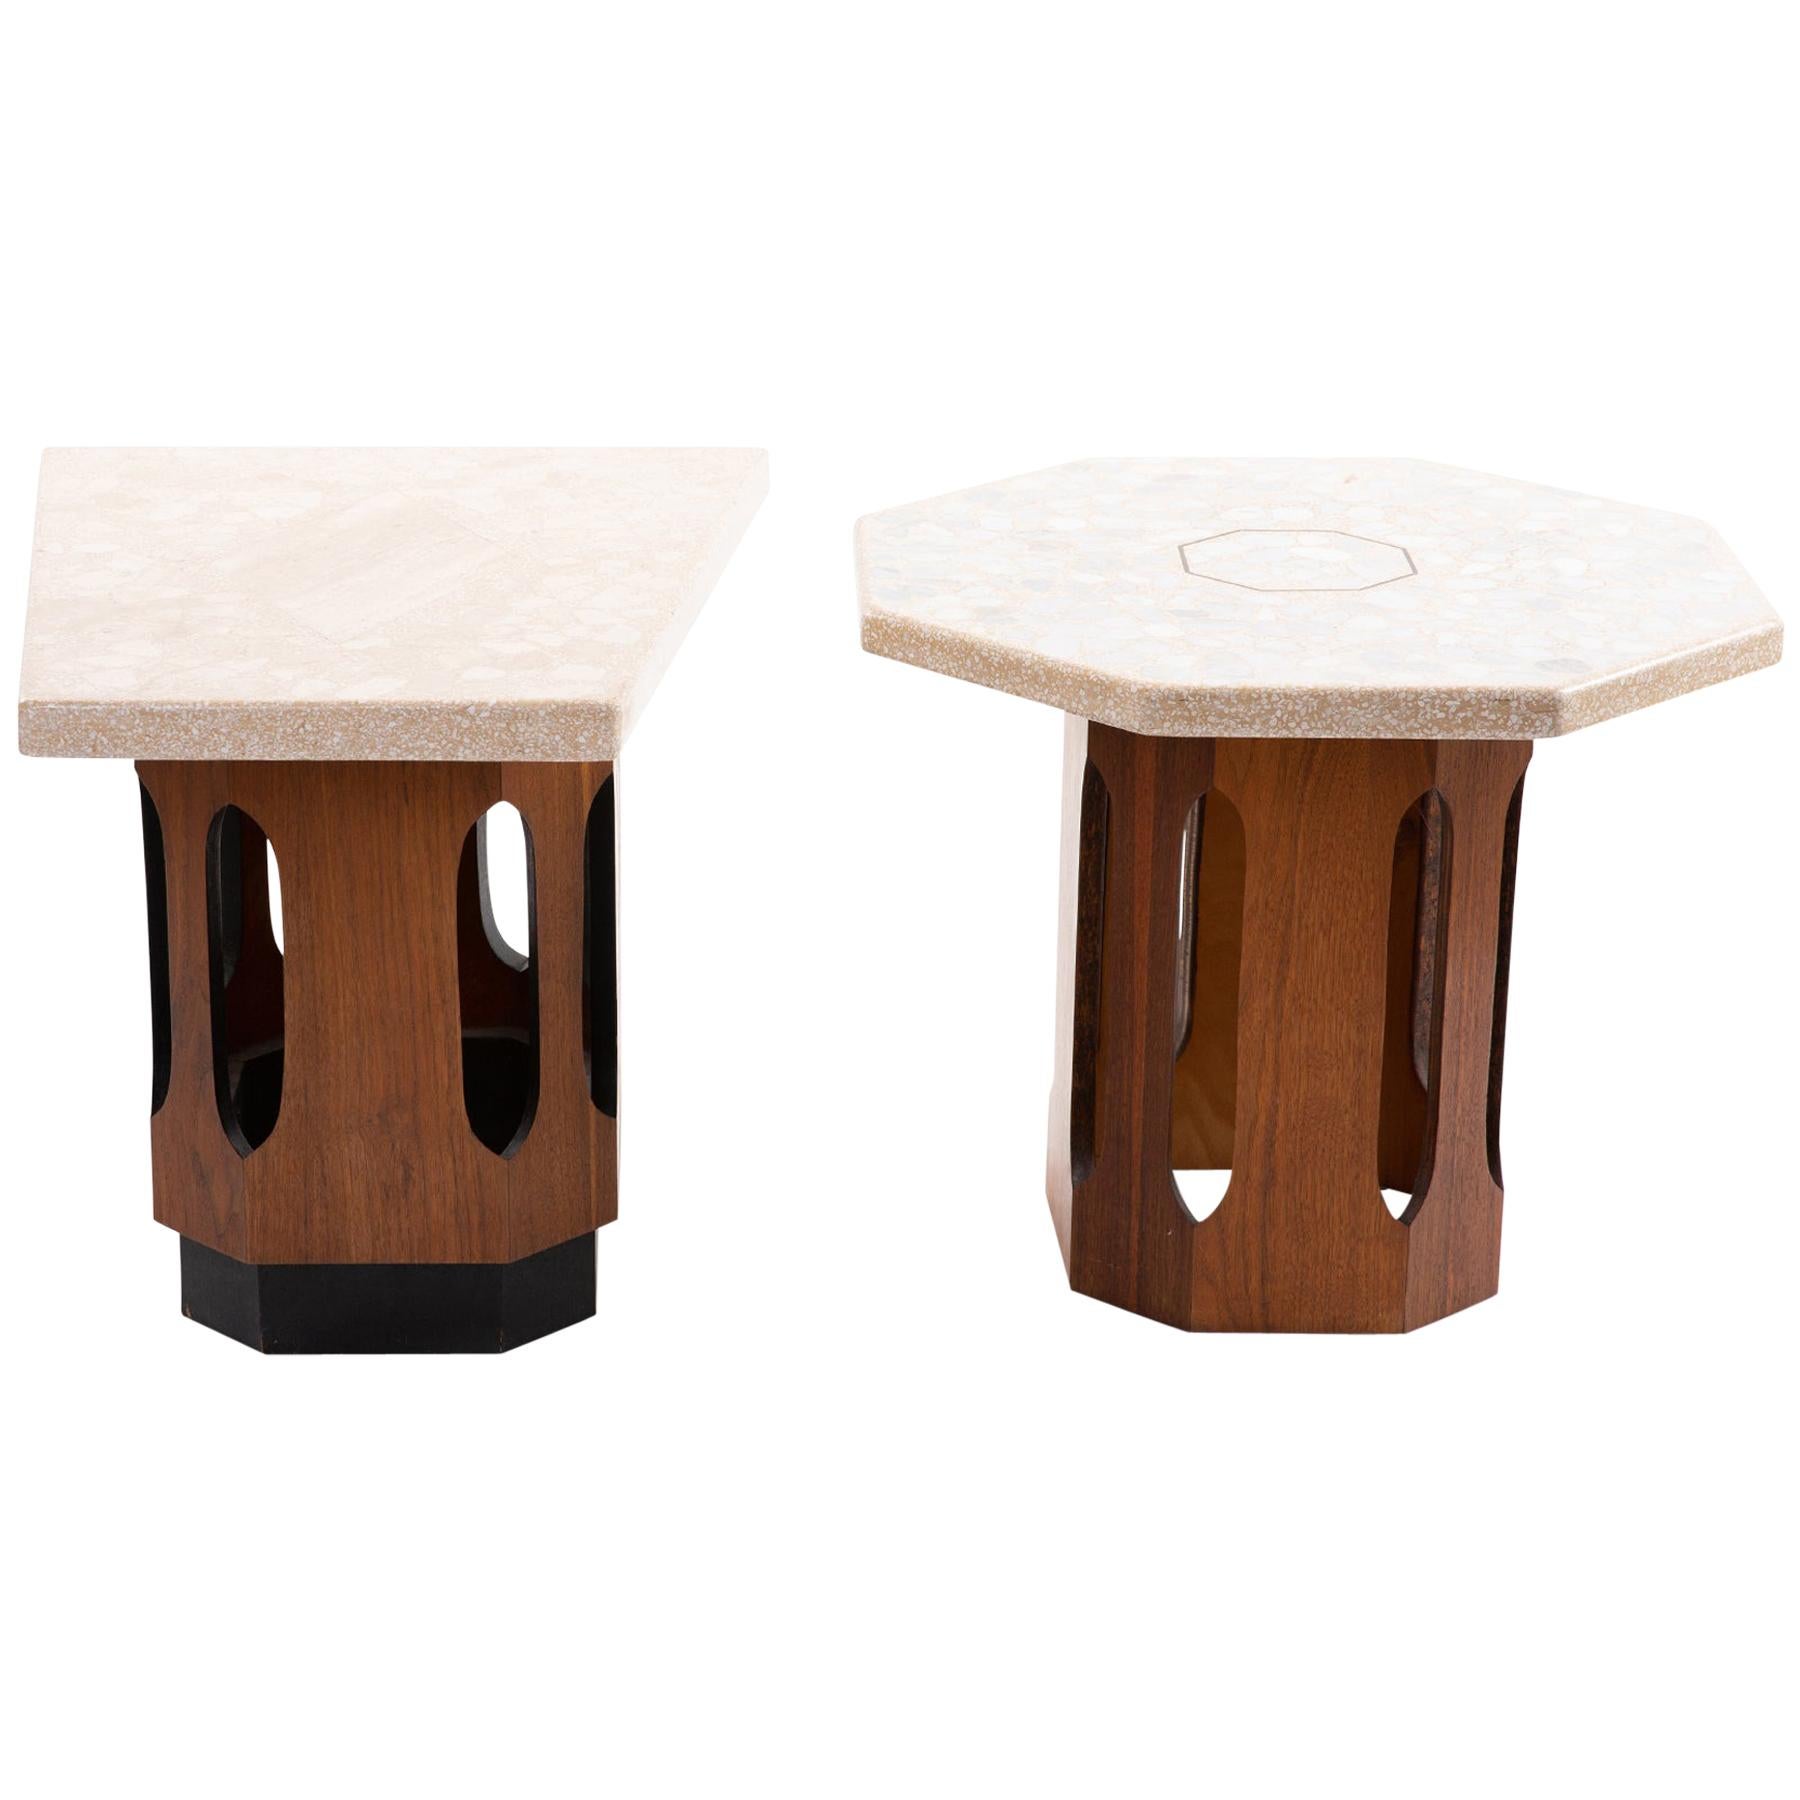 Harvey Probber style terrazzo and walnut side table circa late 1960s. This all original example has an architectural walnut base and solid terrazzo top. Quadrangular table measures: 20.5